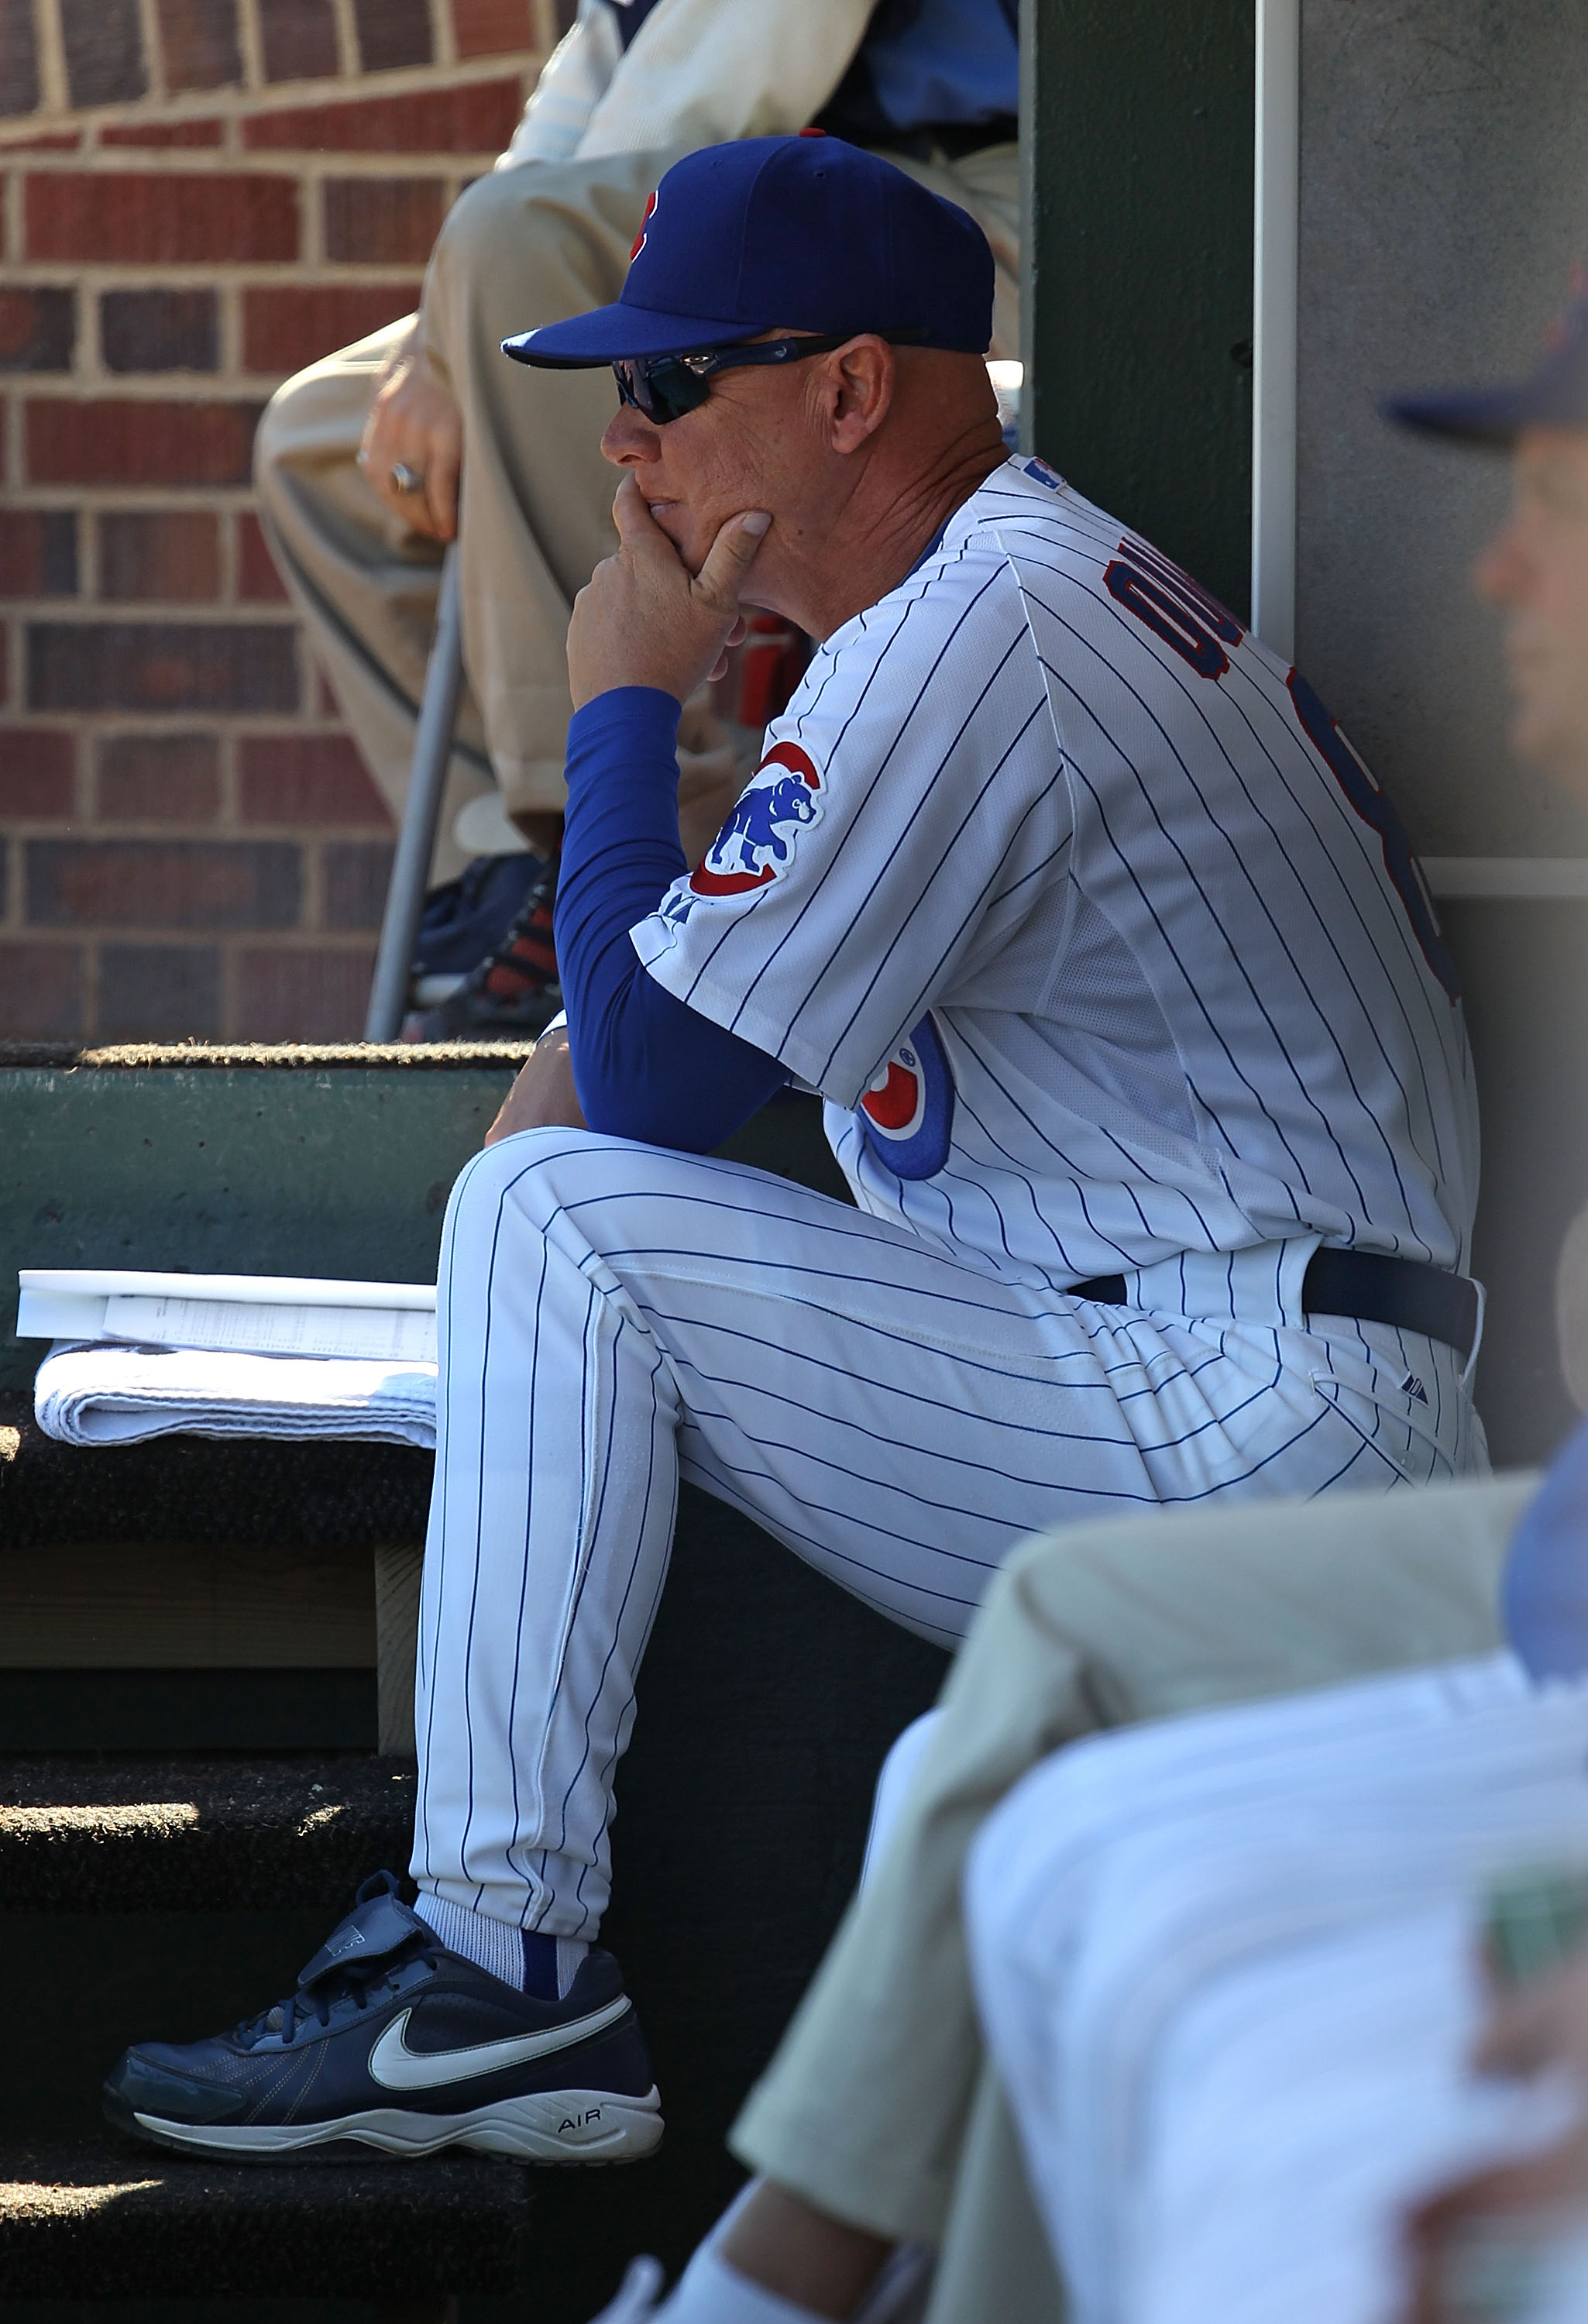 CHICAGO - SEPTEMBER 24: Interim manager Mike Quade #8 of the Chicago Cubs watches as his team takes on the St. Louis Cardinals at Wrigley Field on September 24, 2010 in Chicago, Illinois. The CArdinals defeated the Cubs 7-1. (Photo by Jonathan Daniel/Gett